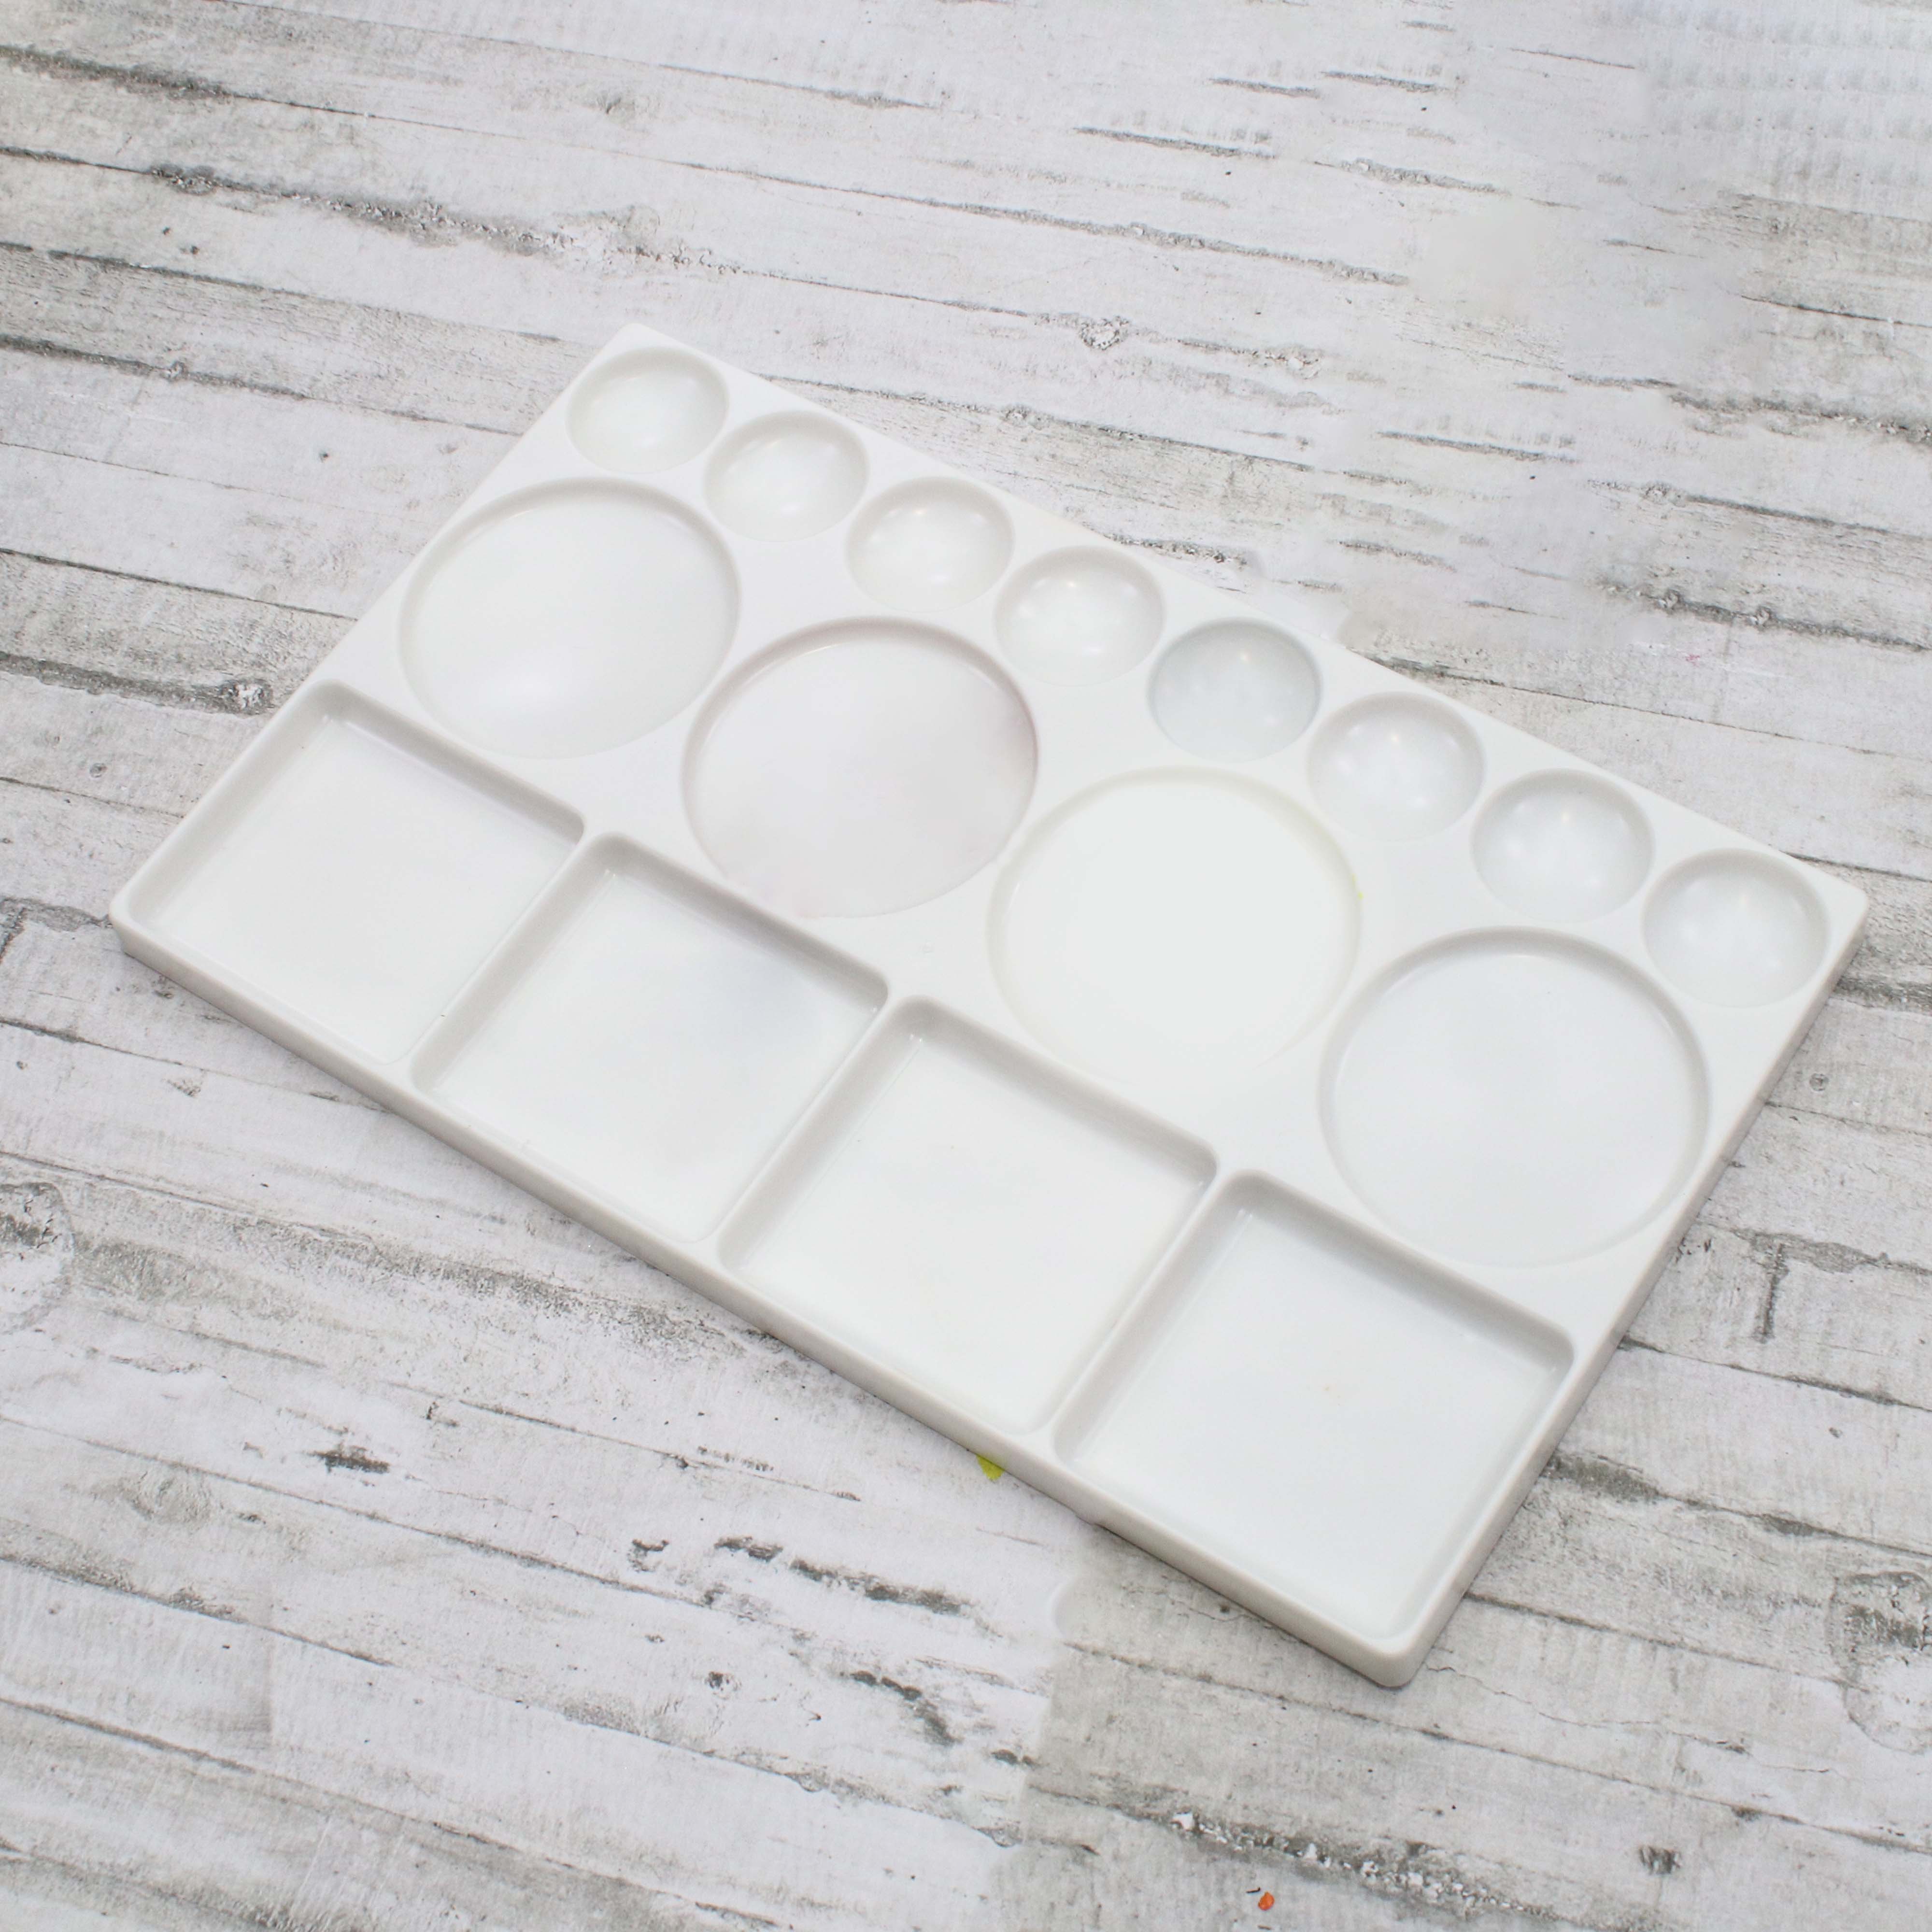 Artists Plastic Palette 10.4inch X 6.4inch 16 Well 1pc